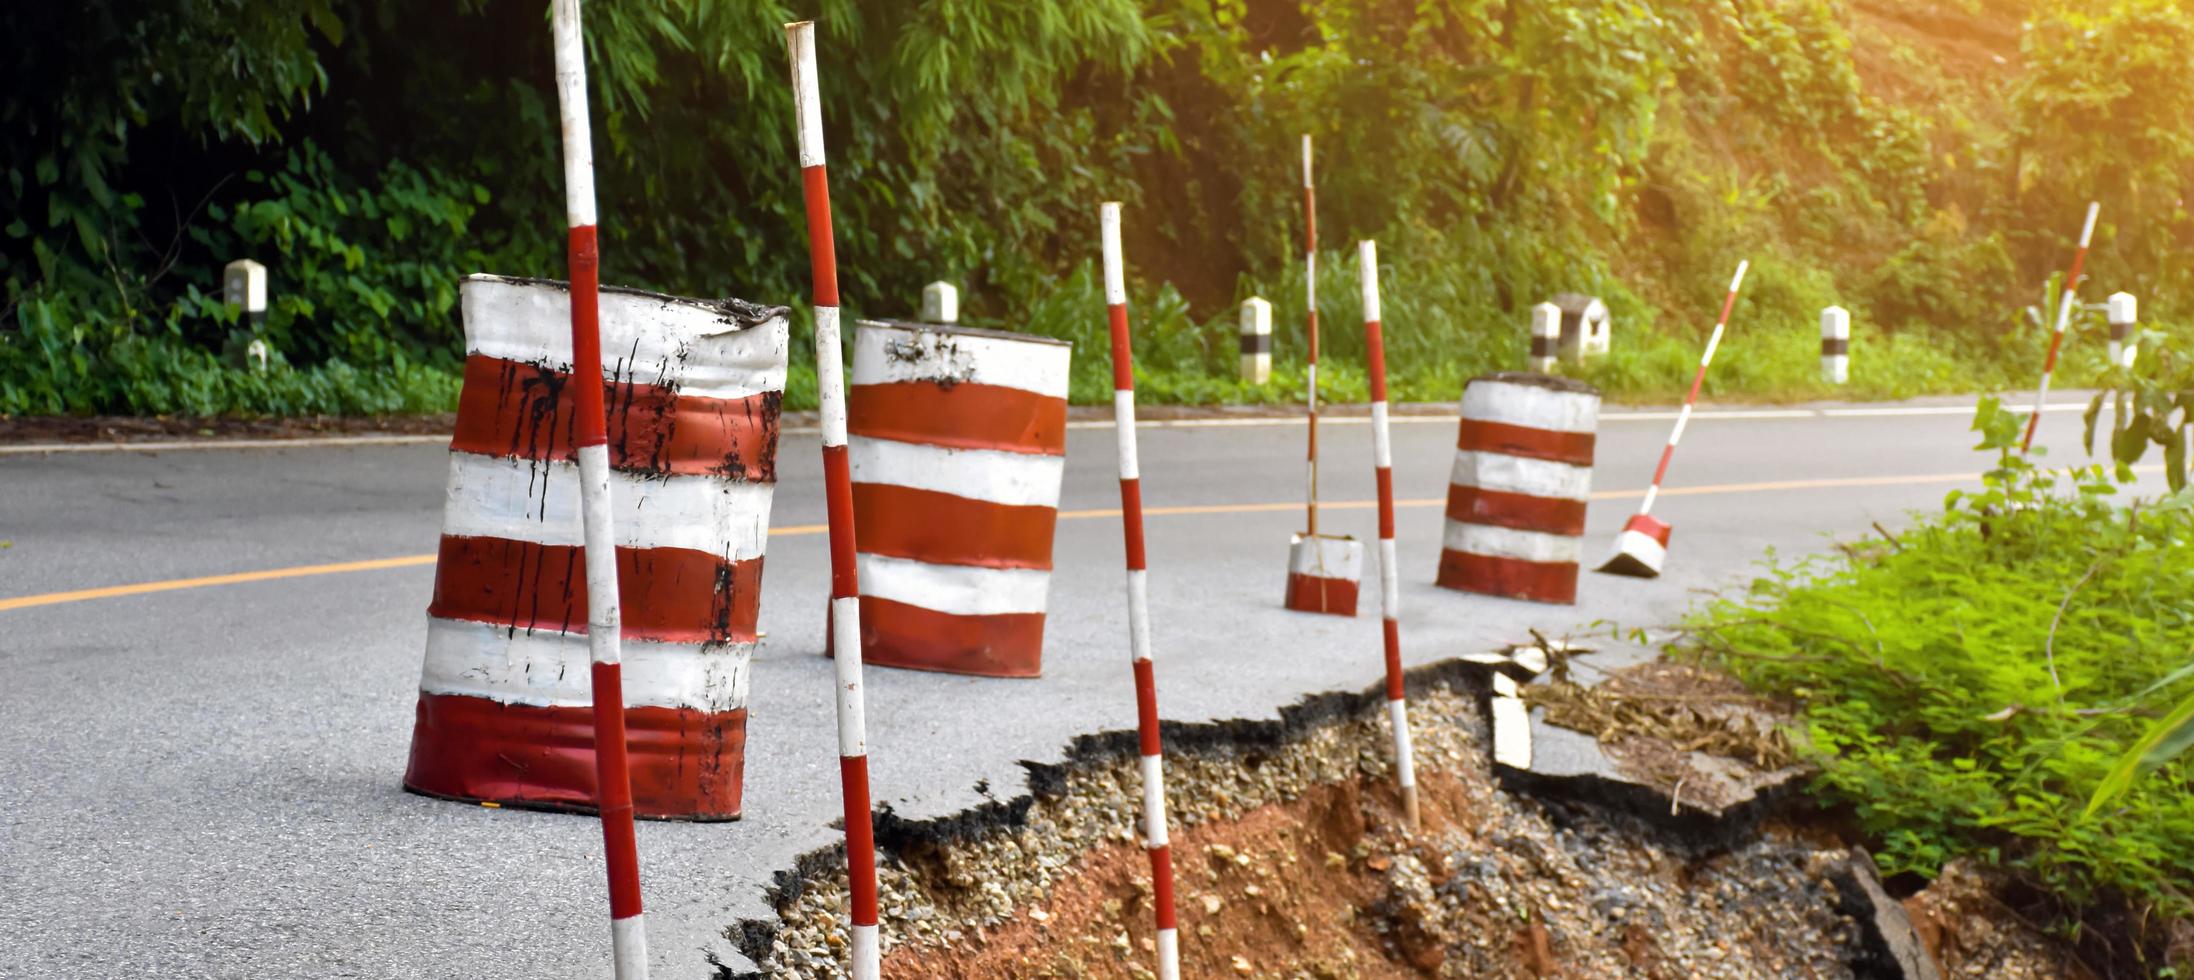 Cylindrical metal buckets and bamboo trunks painted red and white were placed and placed beside the paved road that had been eroded by rain to warn them to be careful when driving and avoiding danger. photo